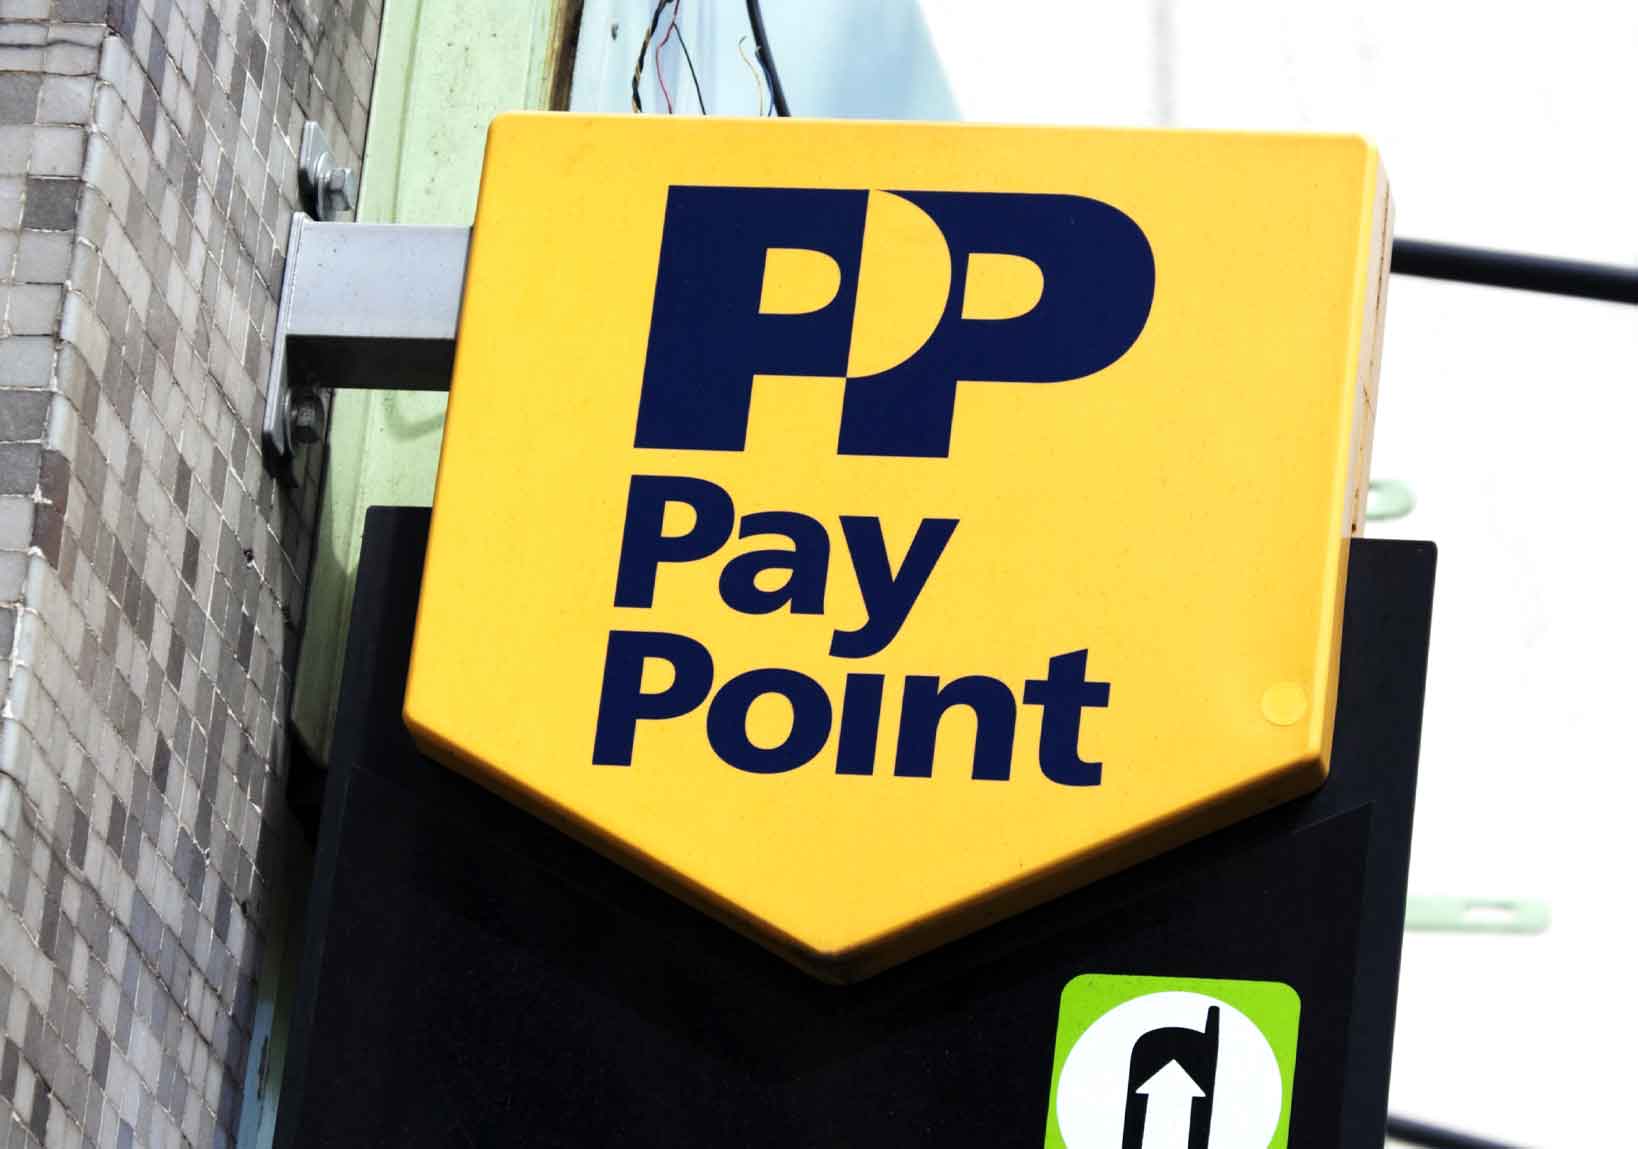 PayPoint stores Payzone